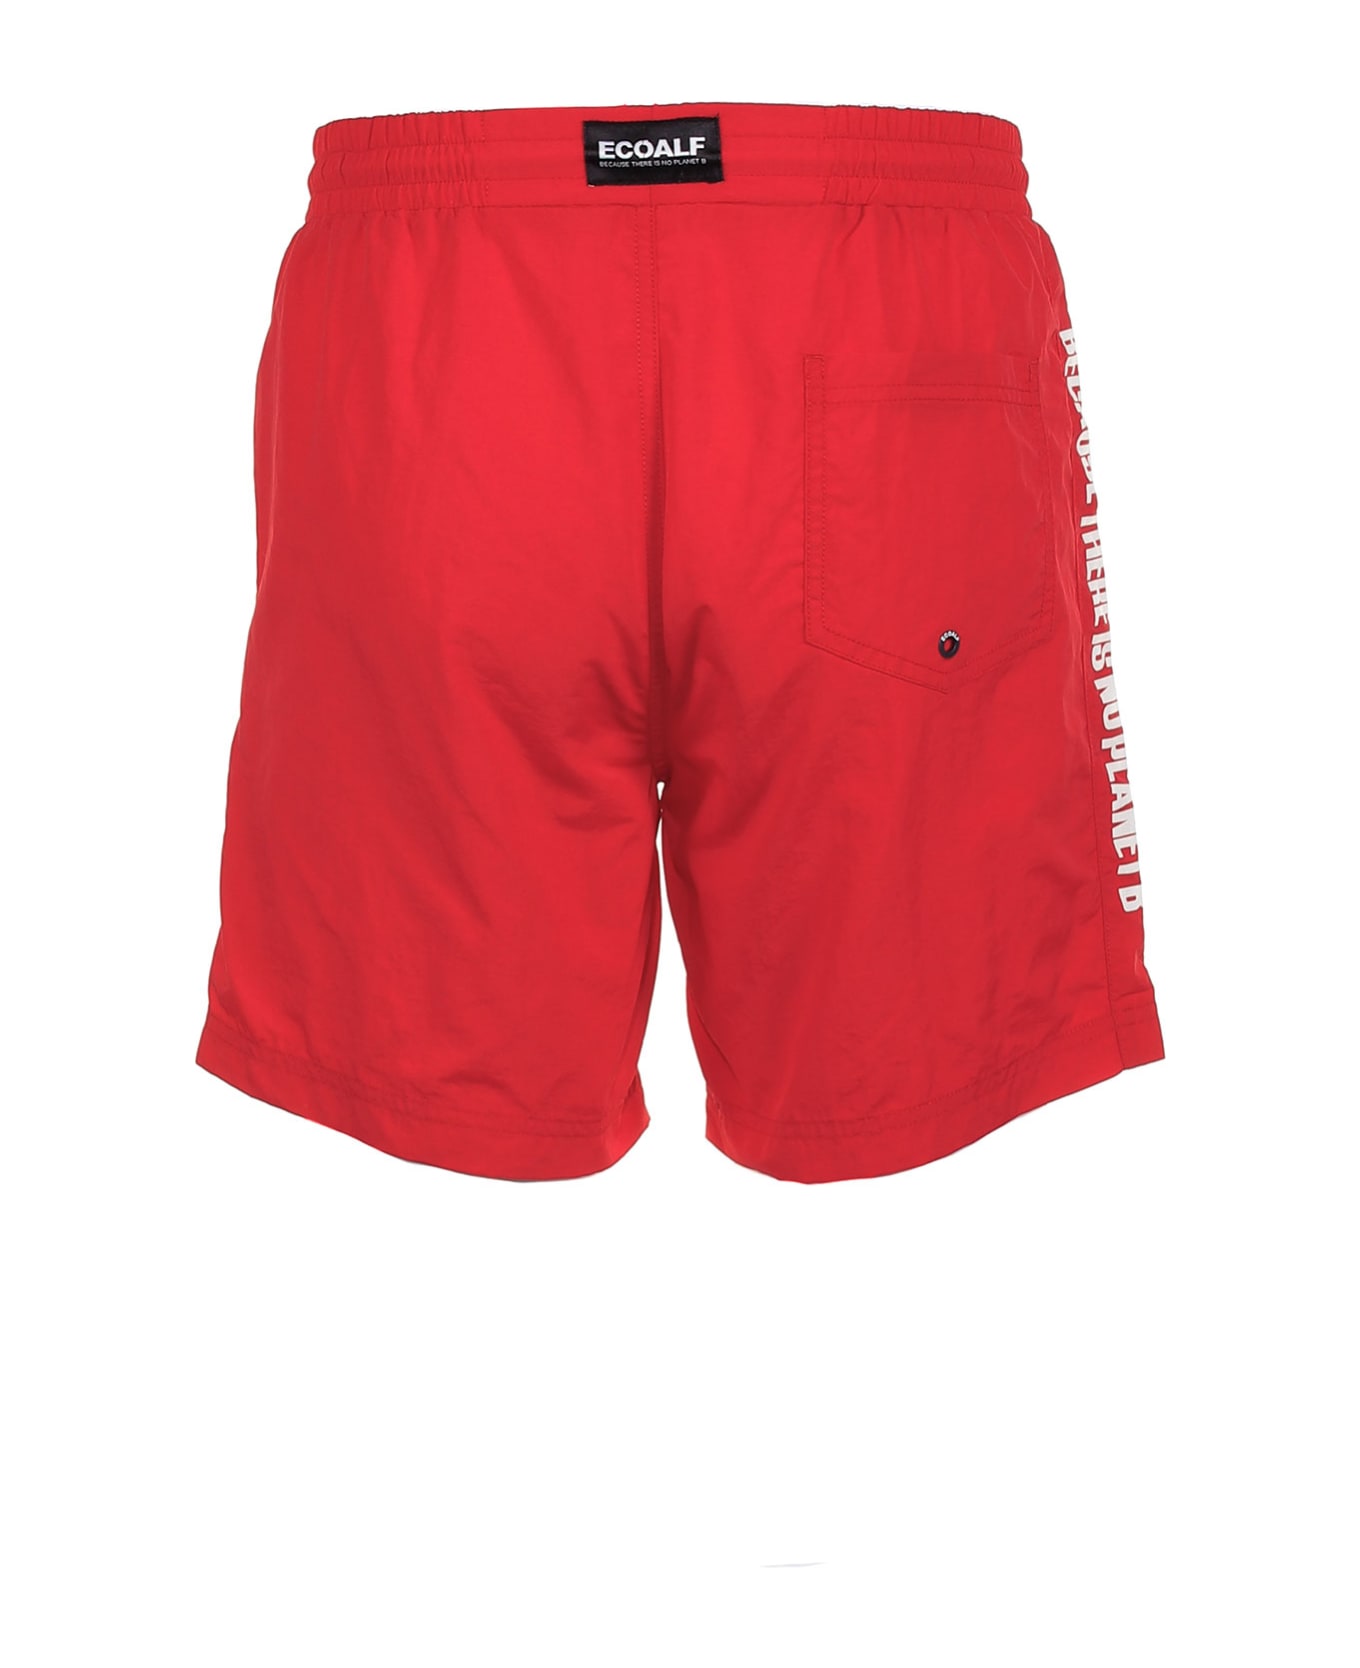 Ecoalf Swimsuit With Drawstring At The Waist - BRIGHT RED 水着